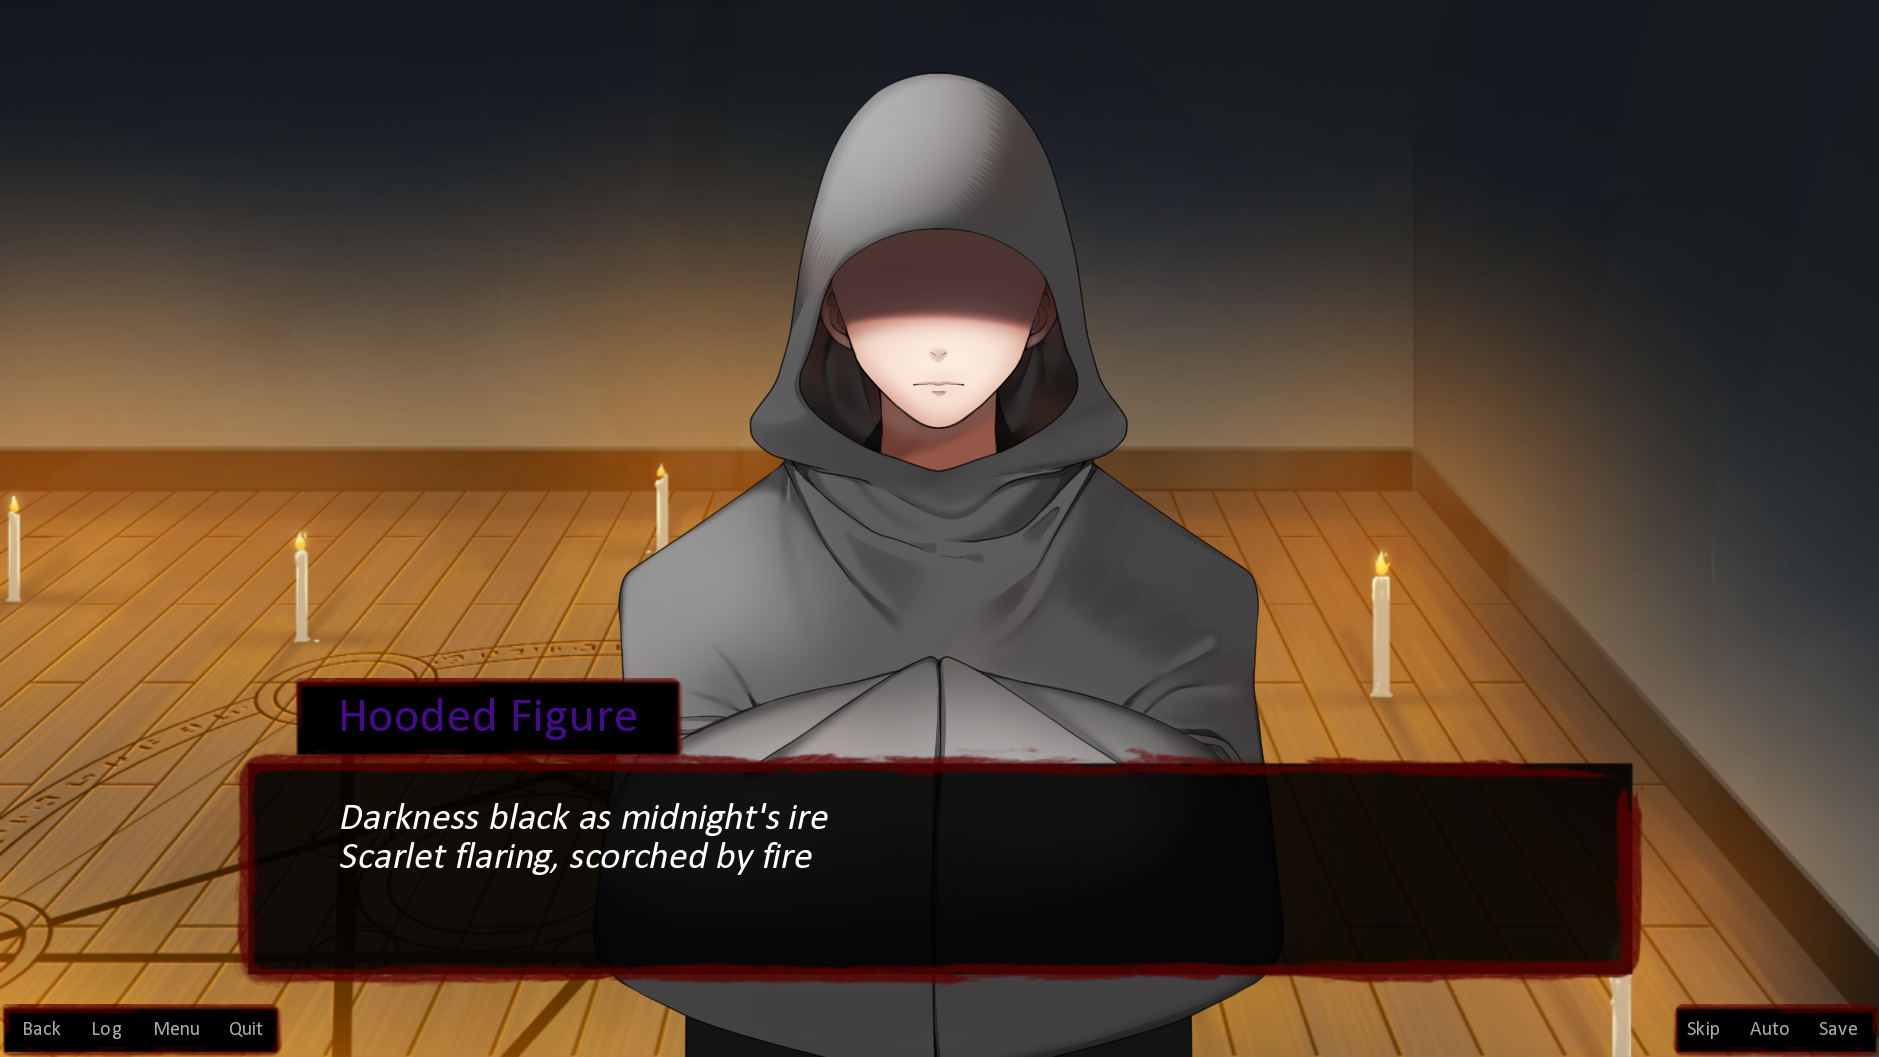 A screenshot from the visual novel The Many Deaths of Lily Kosen. A mysterious hooded figure is chanting in some sort of spell.